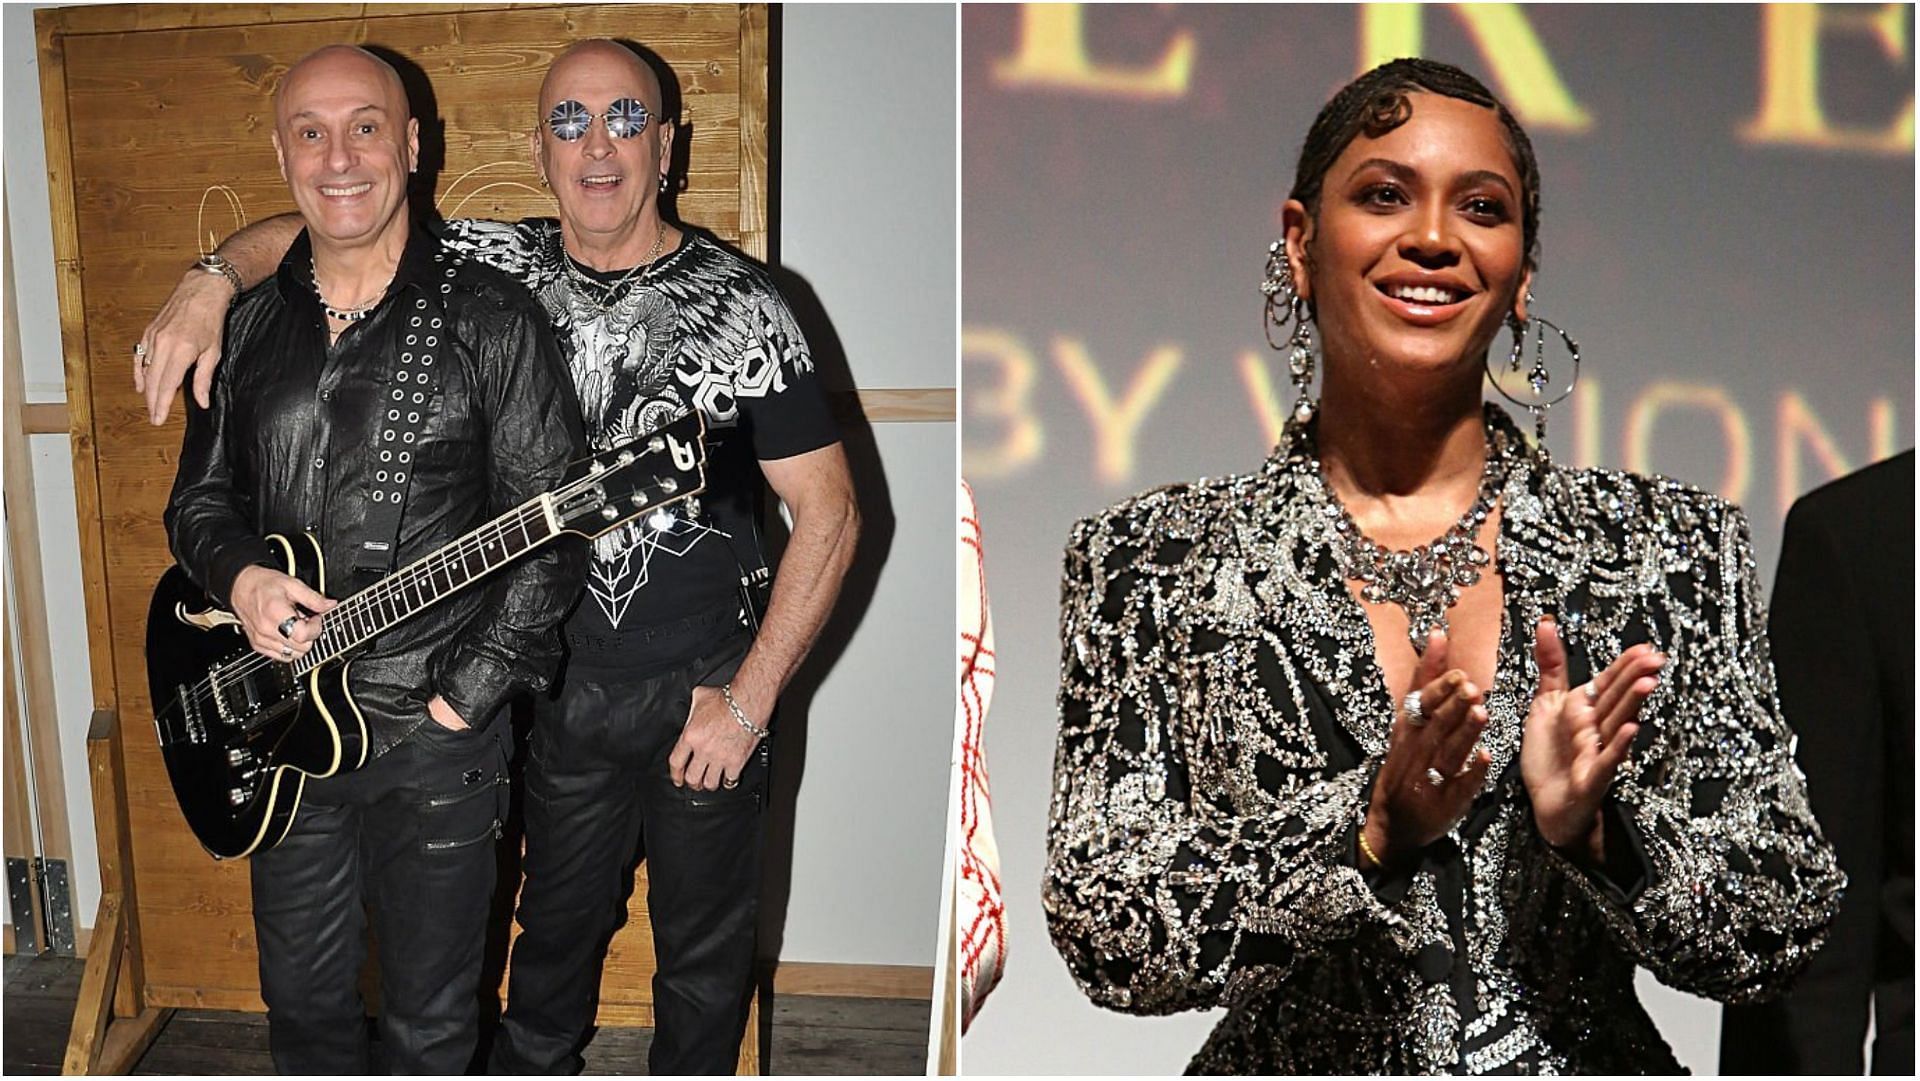 Right Said Fred claimed that Beyonce sampled their song in her track (Images via Manfred Schmid and Jesse Grant/Getty Images)